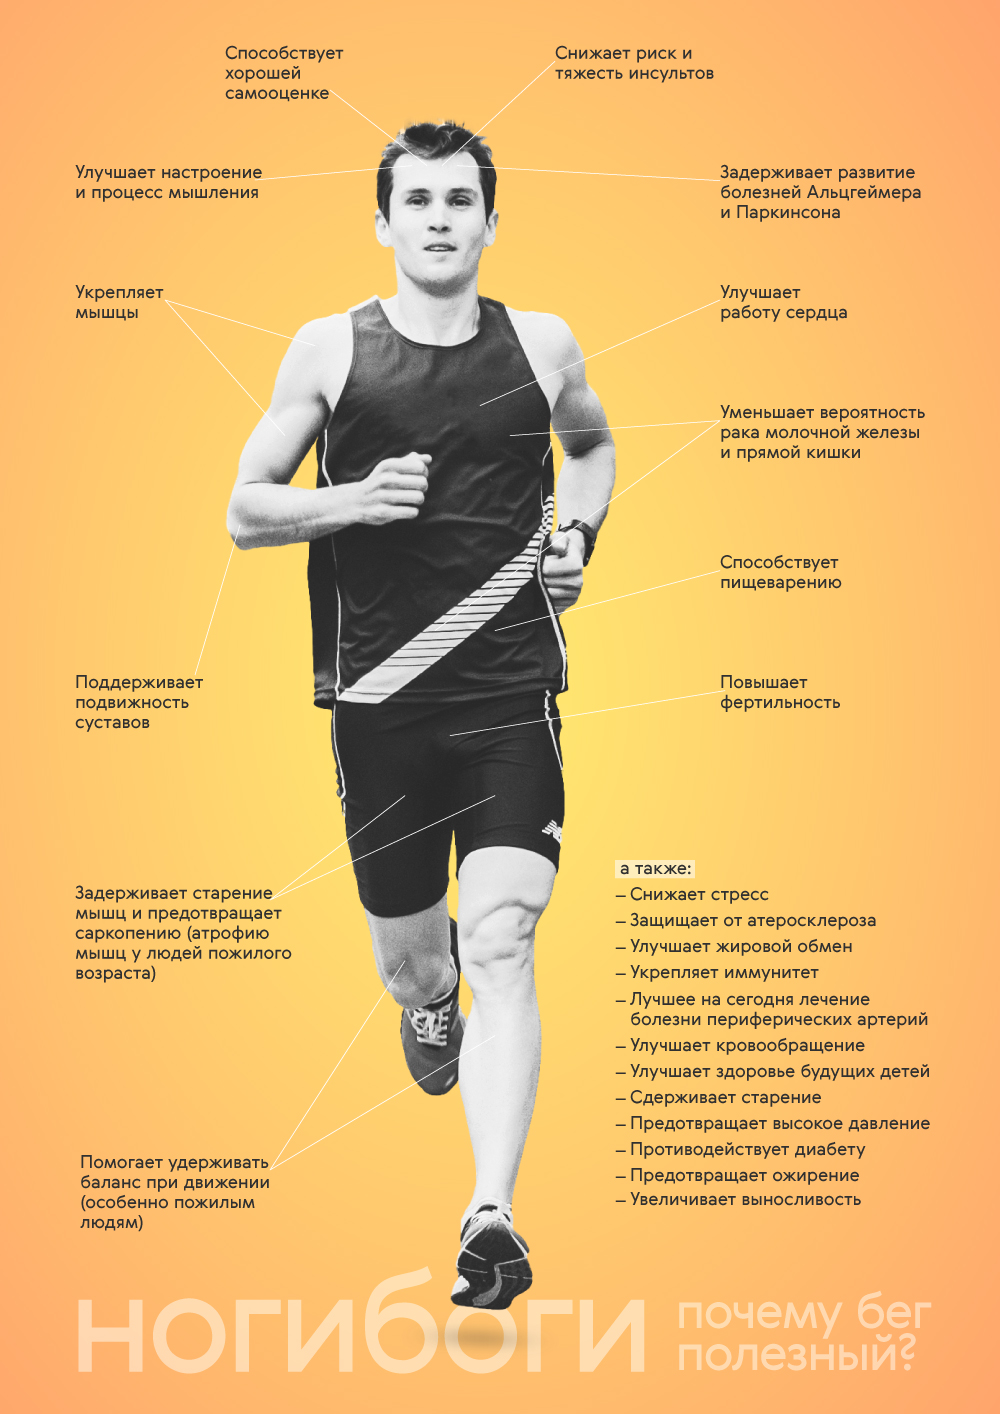 Running - the meaning of sleep